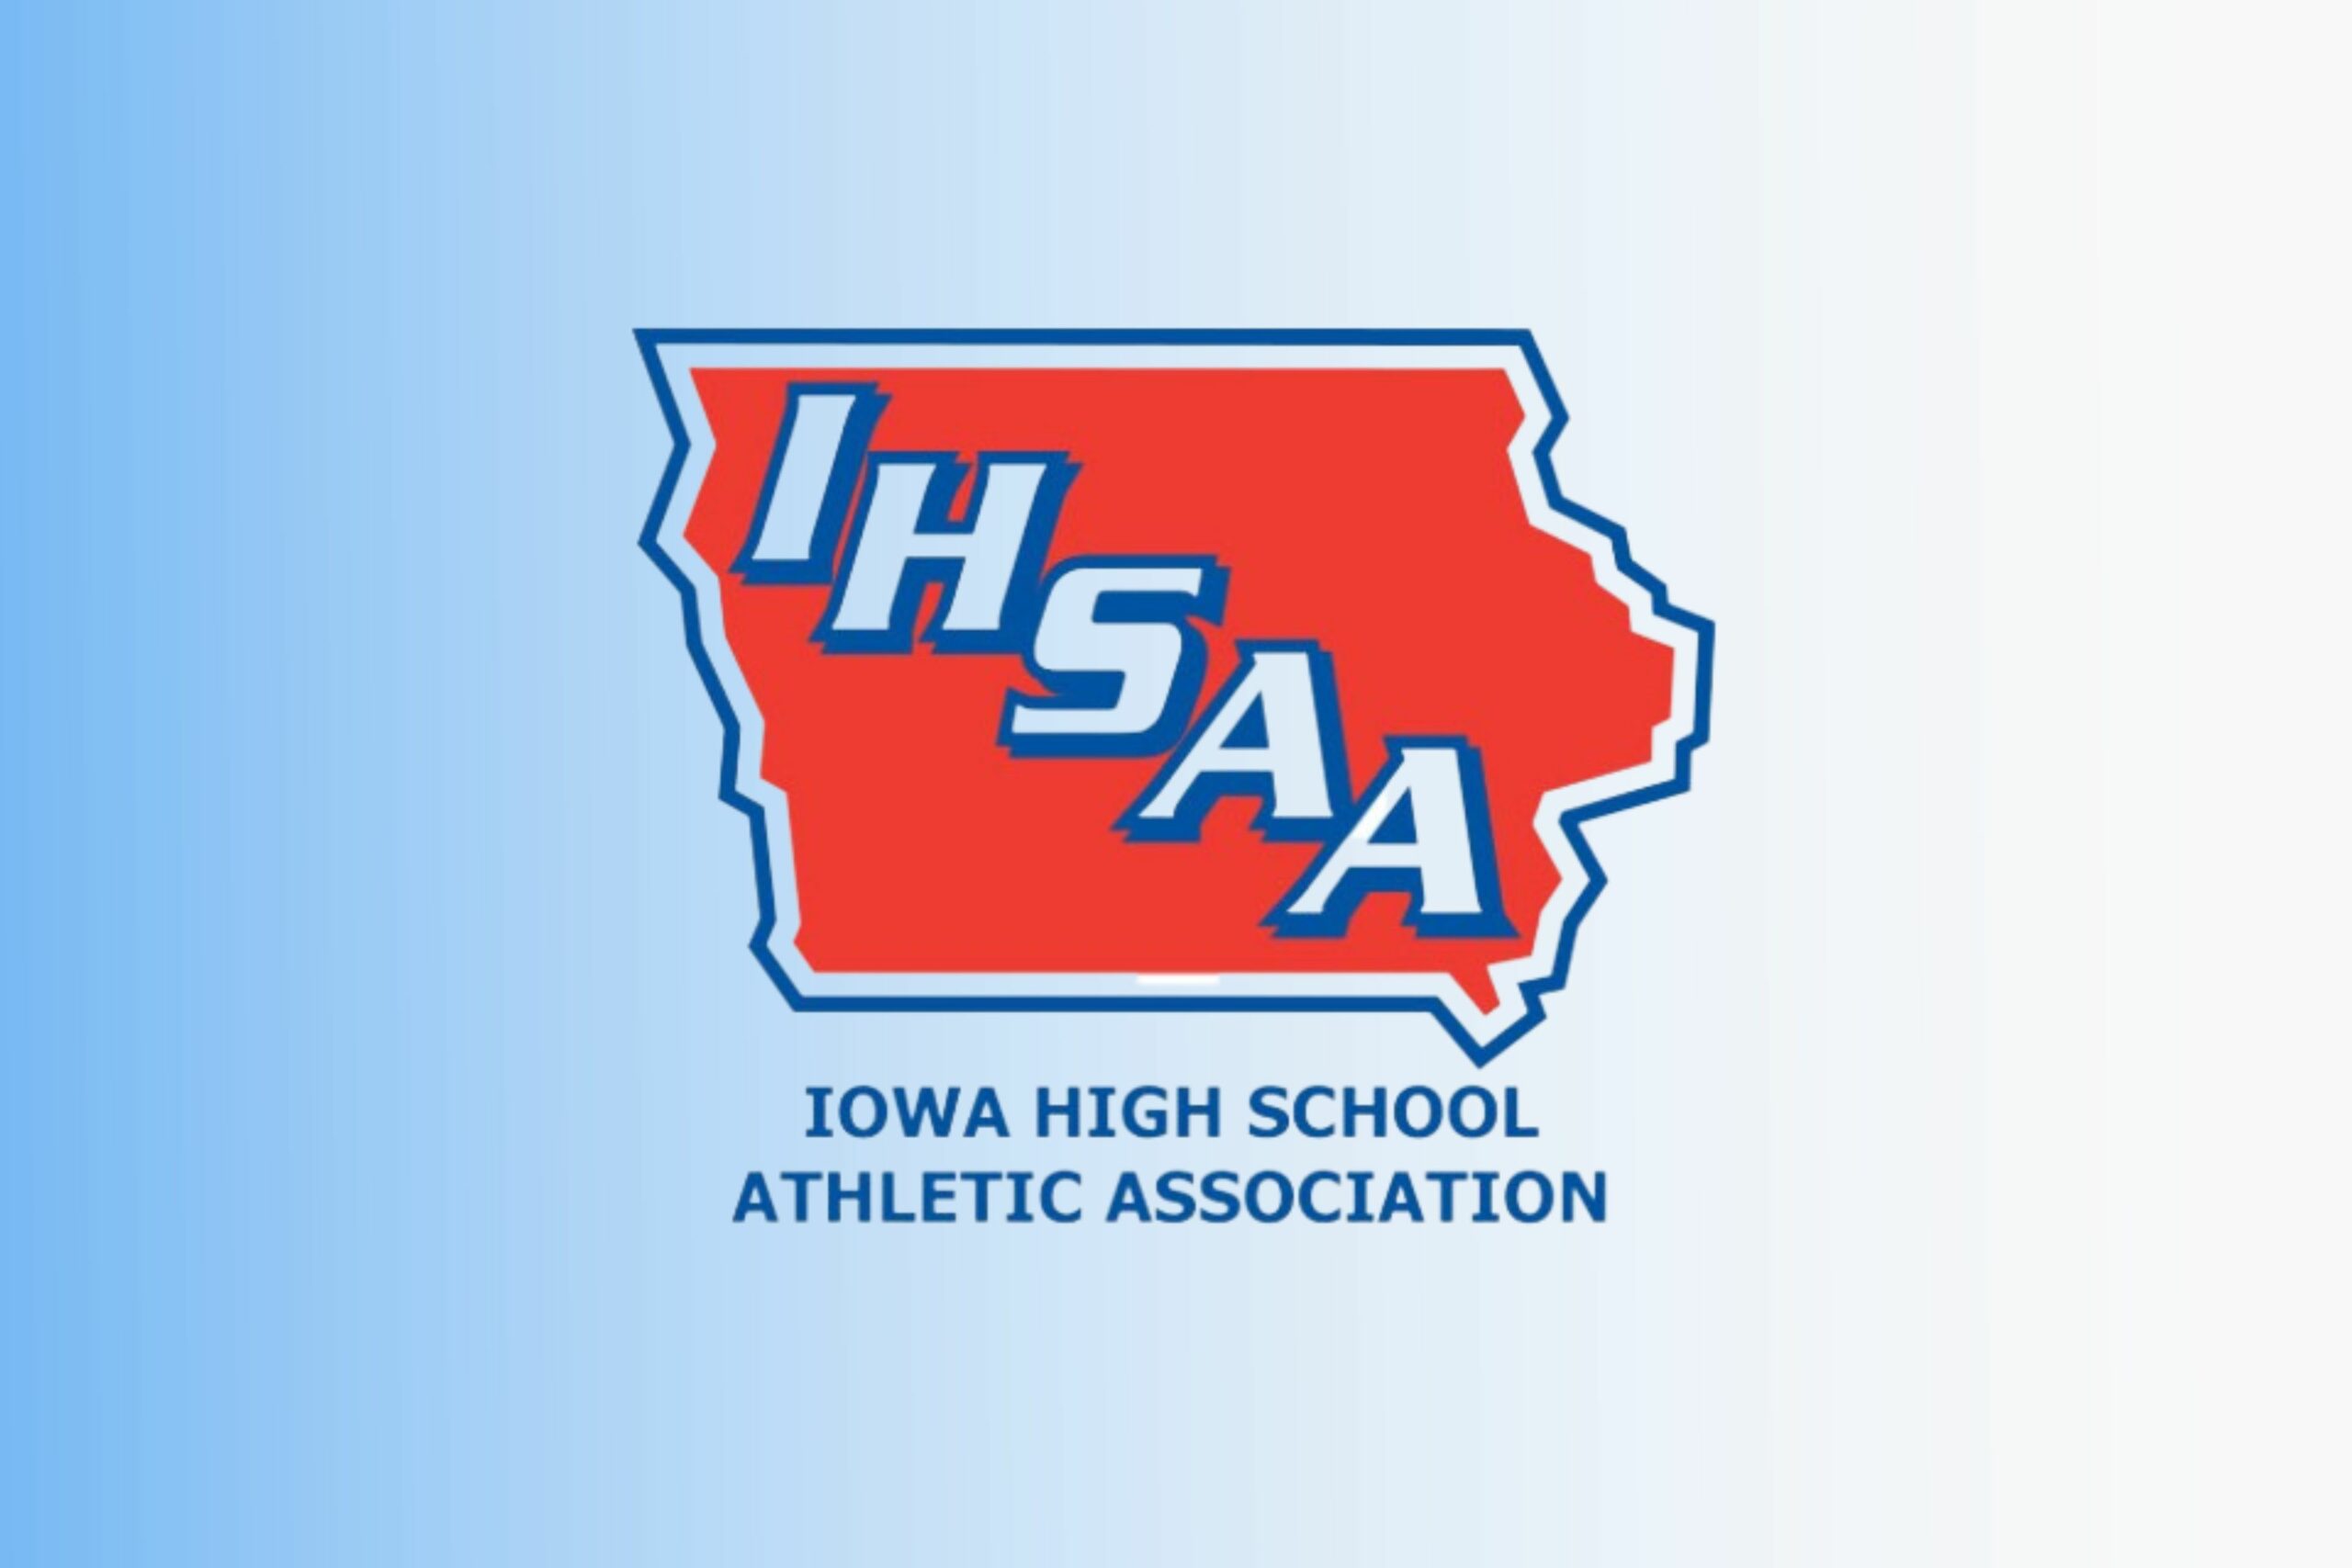 Iowa is now 15th state to allow high school student-athletes to profit off of their NIL